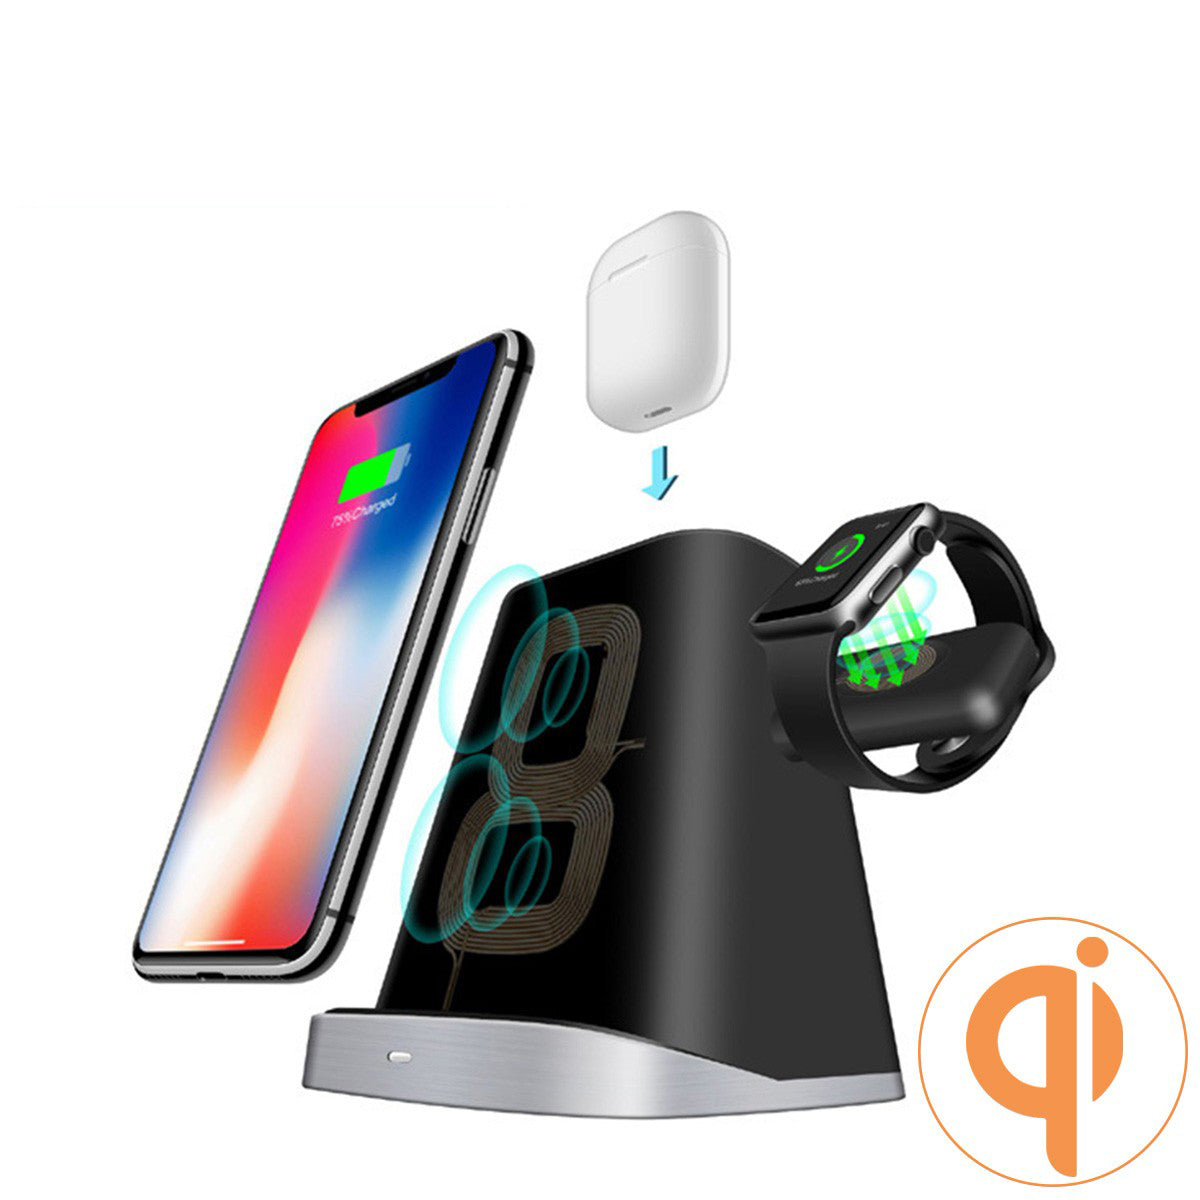 3 in 1 Wireless Charger Station for iPhone/AirPods/AppleWatch or Samsung/HuaWei/XiaoMi